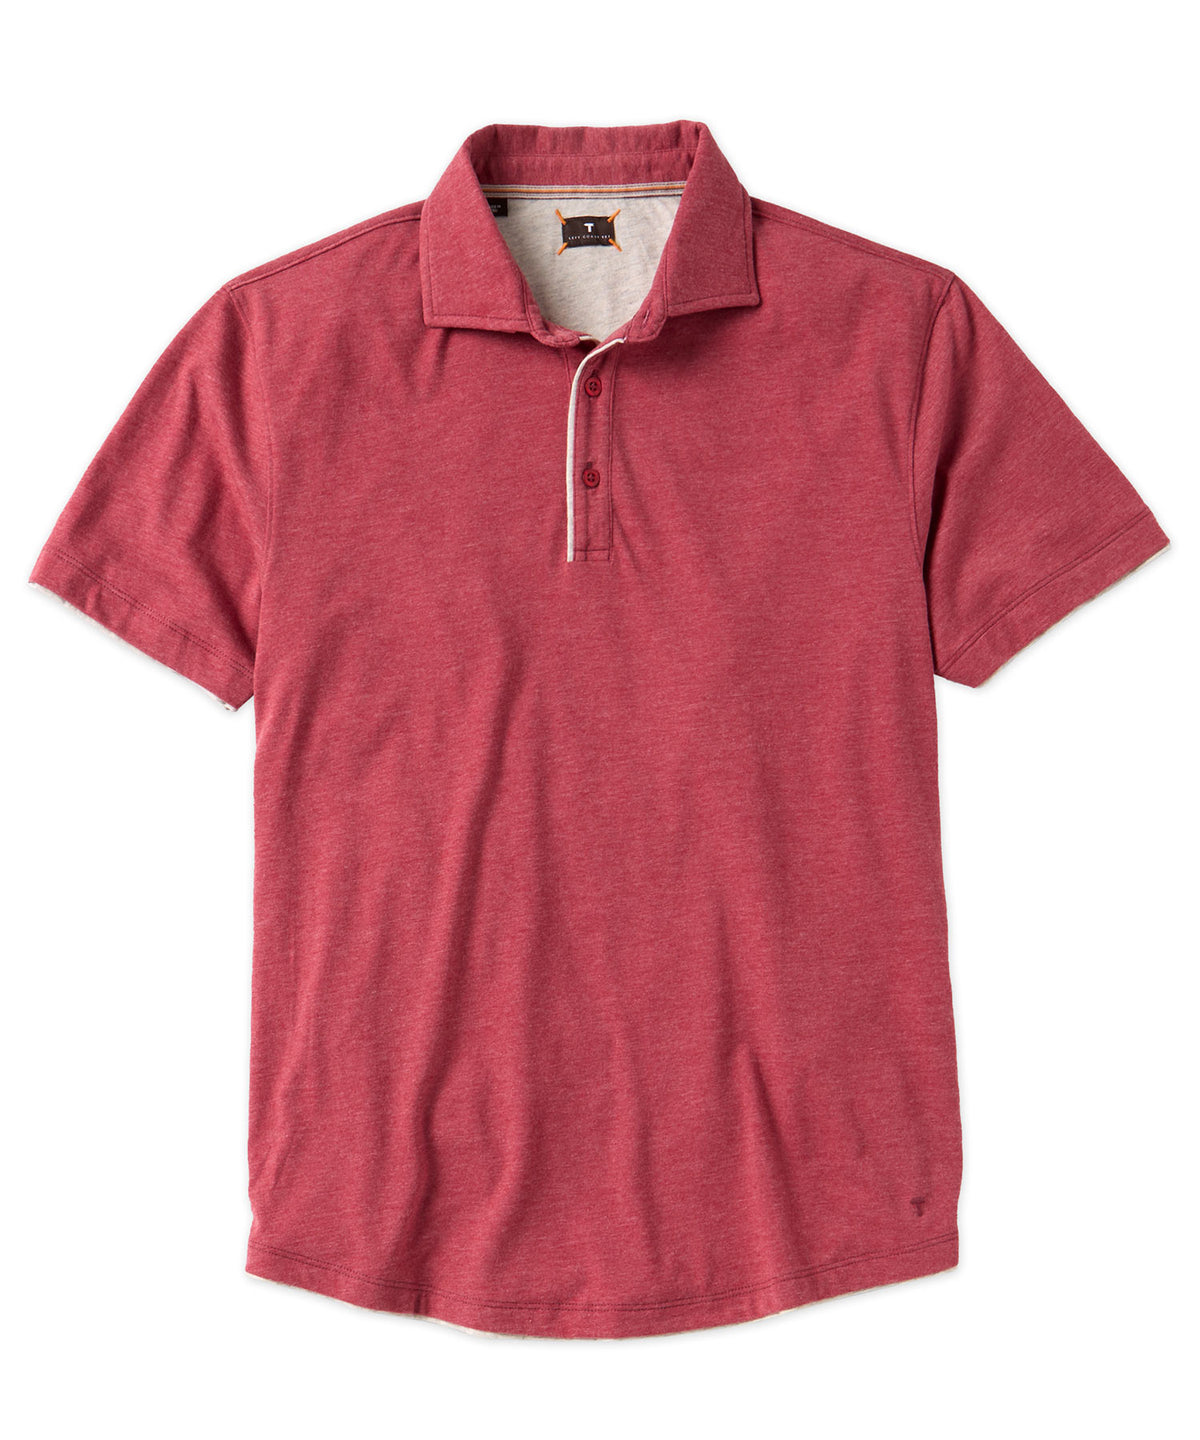 Left Coast Tee Cotton-Blend Piped Polo Shirt